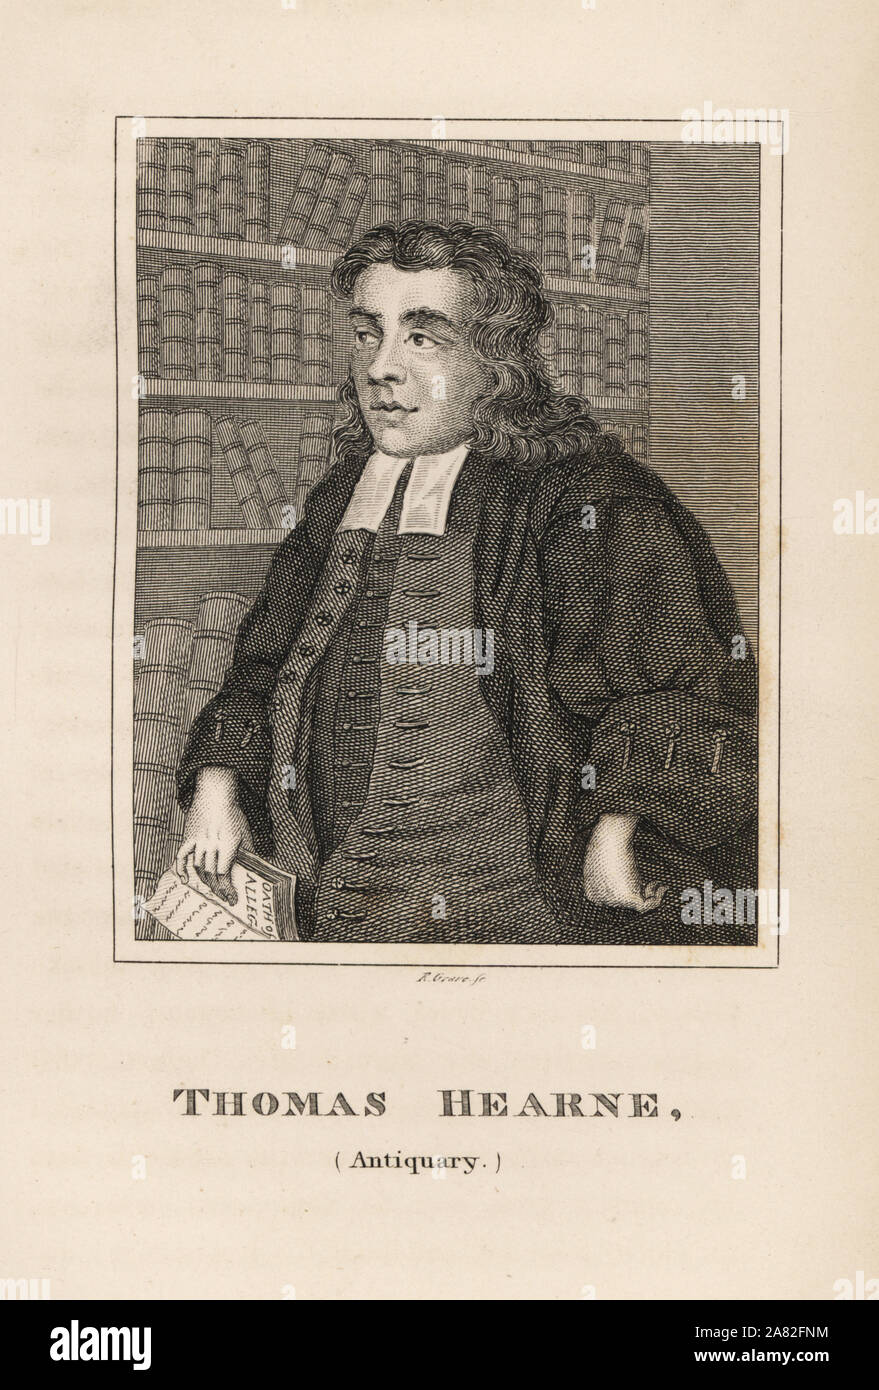 Thomas Hearne, antiquarian and book collector, 18th century. Engraving by R. Grave from James Caulfield's Portraits, Memoirs and Characters of Remarkable Persons, London, 1819. Stock Photo